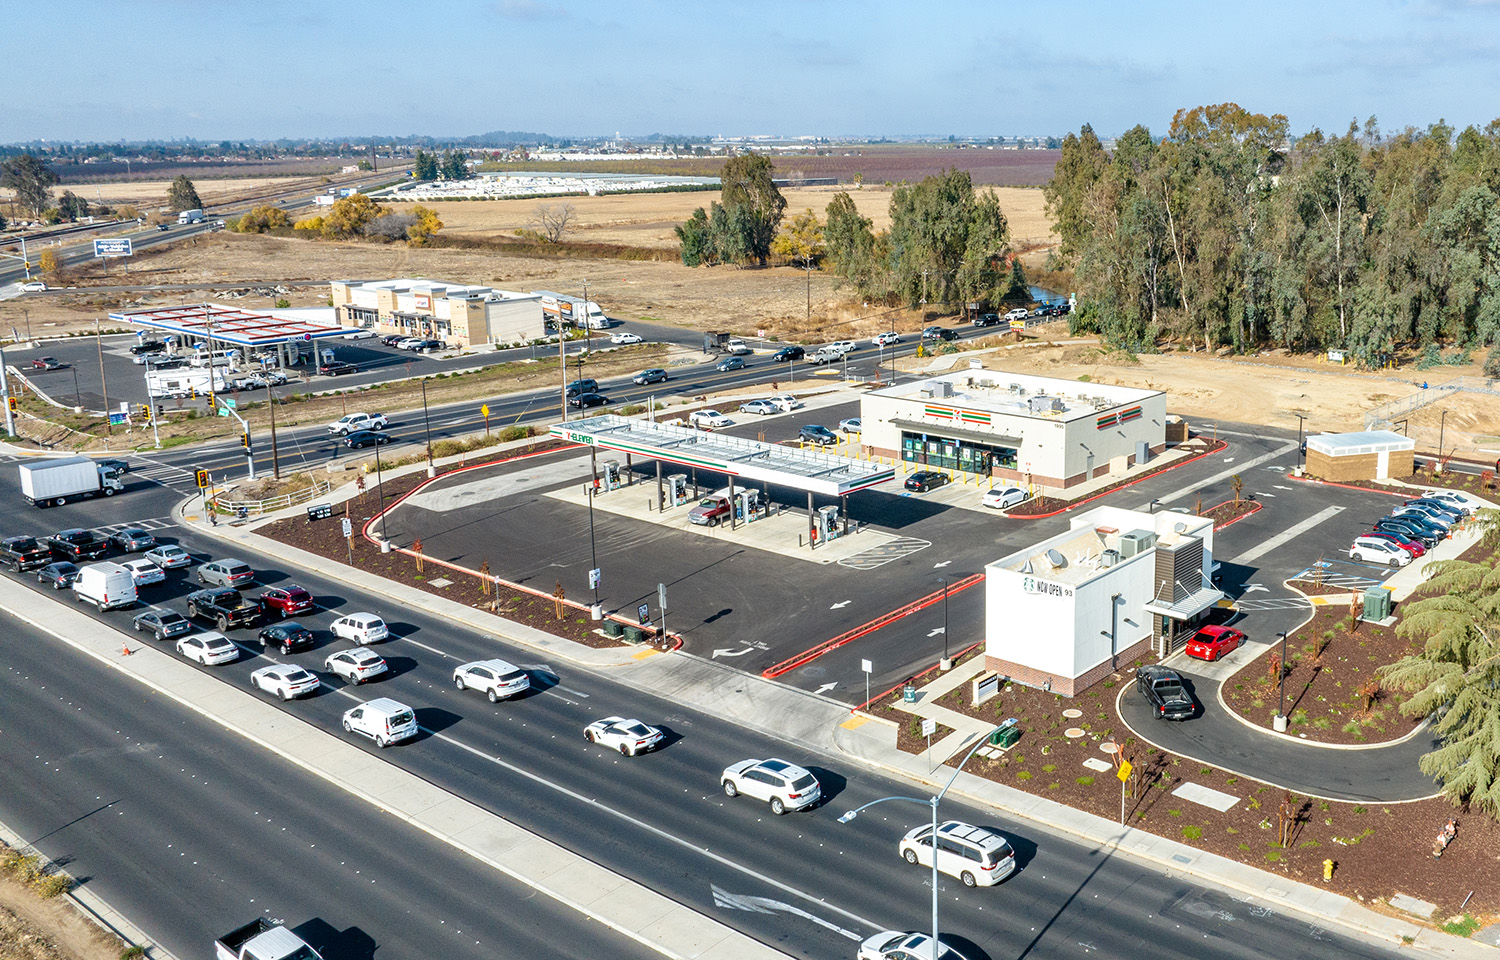 Hanley Investment Group Arranges Sales of New Construction 7-Eleven and Starbucks Drive-Thru in Merced, Calif., for $8.2 Million